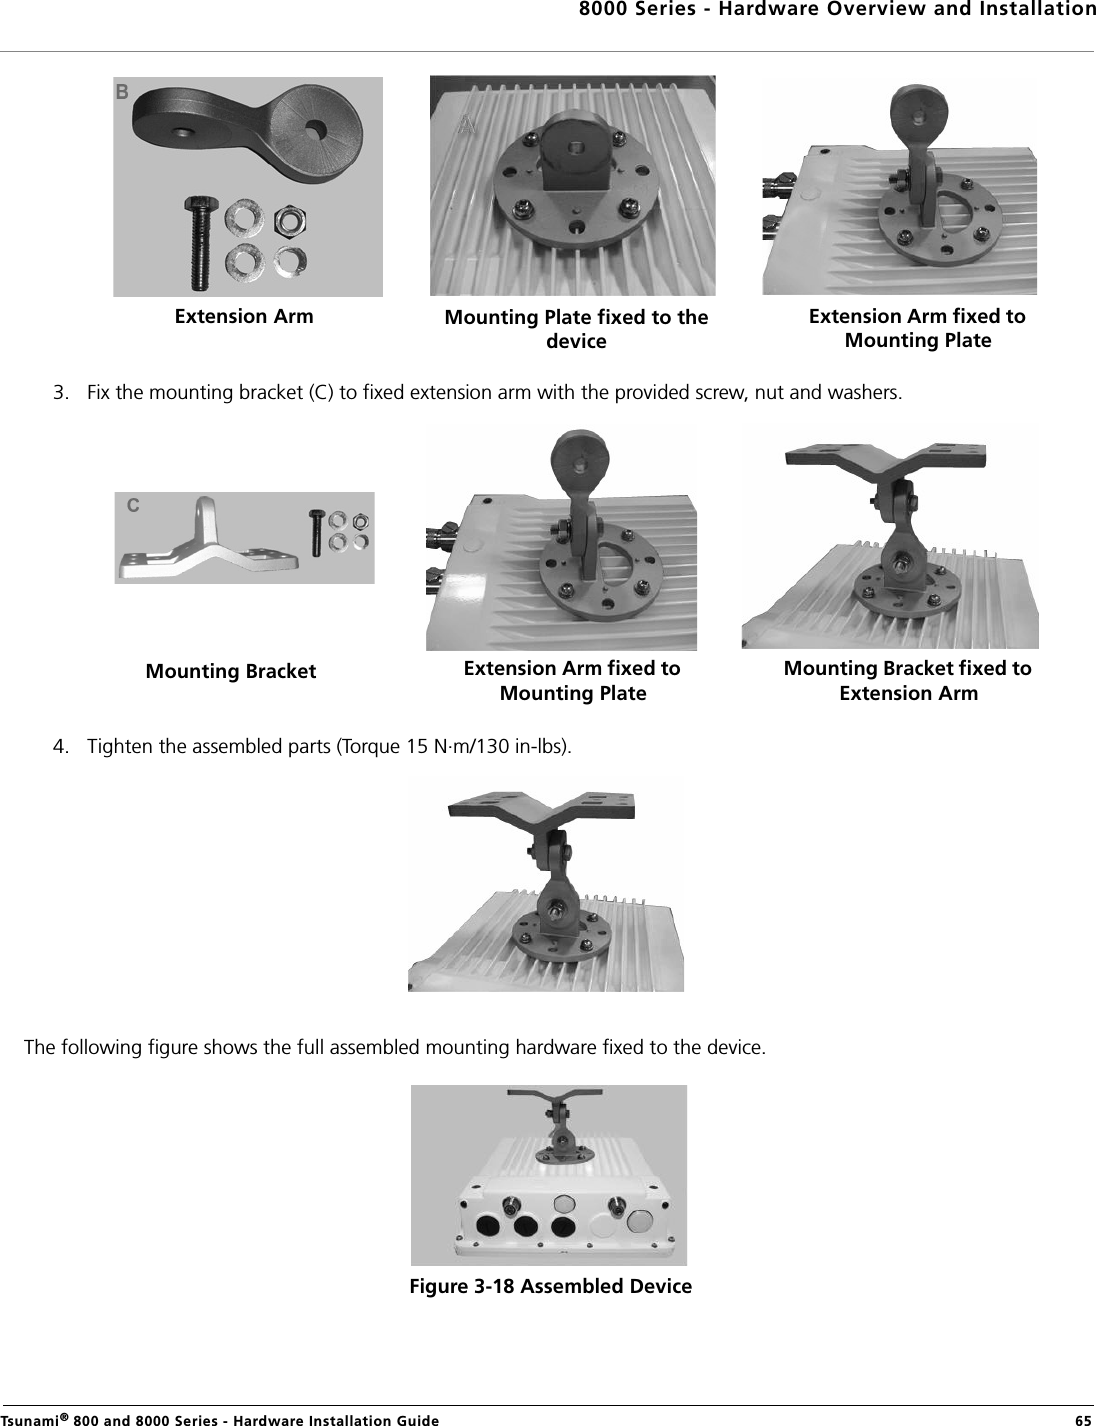 8000 Series - Hardware Overview and InstallationTsunami® 800 and 8000 Series - Hardware Installation Guide  653. Fix the mounting bracket (C) to fixed extension arm with the provided screw, nut and washers.4. Tighten the assembled parts (Torque 15 N.m/130 in-lbs).The following figure shows the full assembled mounting hardware fixed to the device.Figure 3-18 Assembled DeviceExtension Arm Mounting Plate fixed to the deviceExtension Arm fixed to Mounting PlateMounting Bracket Extension Arm fixed to Mounting PlateMounting Bracket fixed to Extension Arm